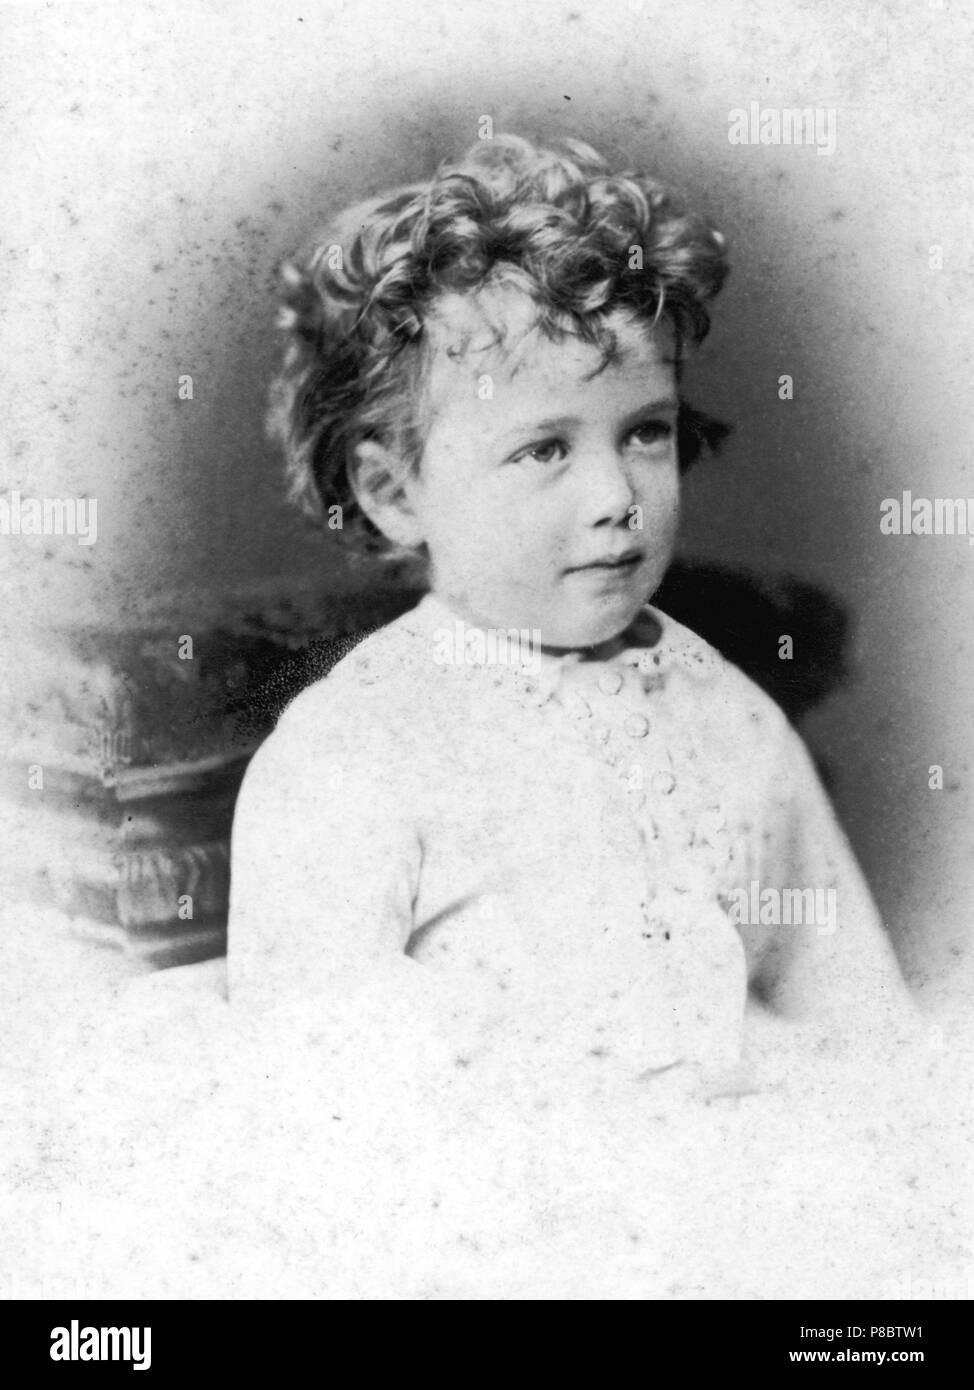 Nicholas II as child. Museum: Russian State Film and Photo Archive, Krasnogorsk. Stock Photo